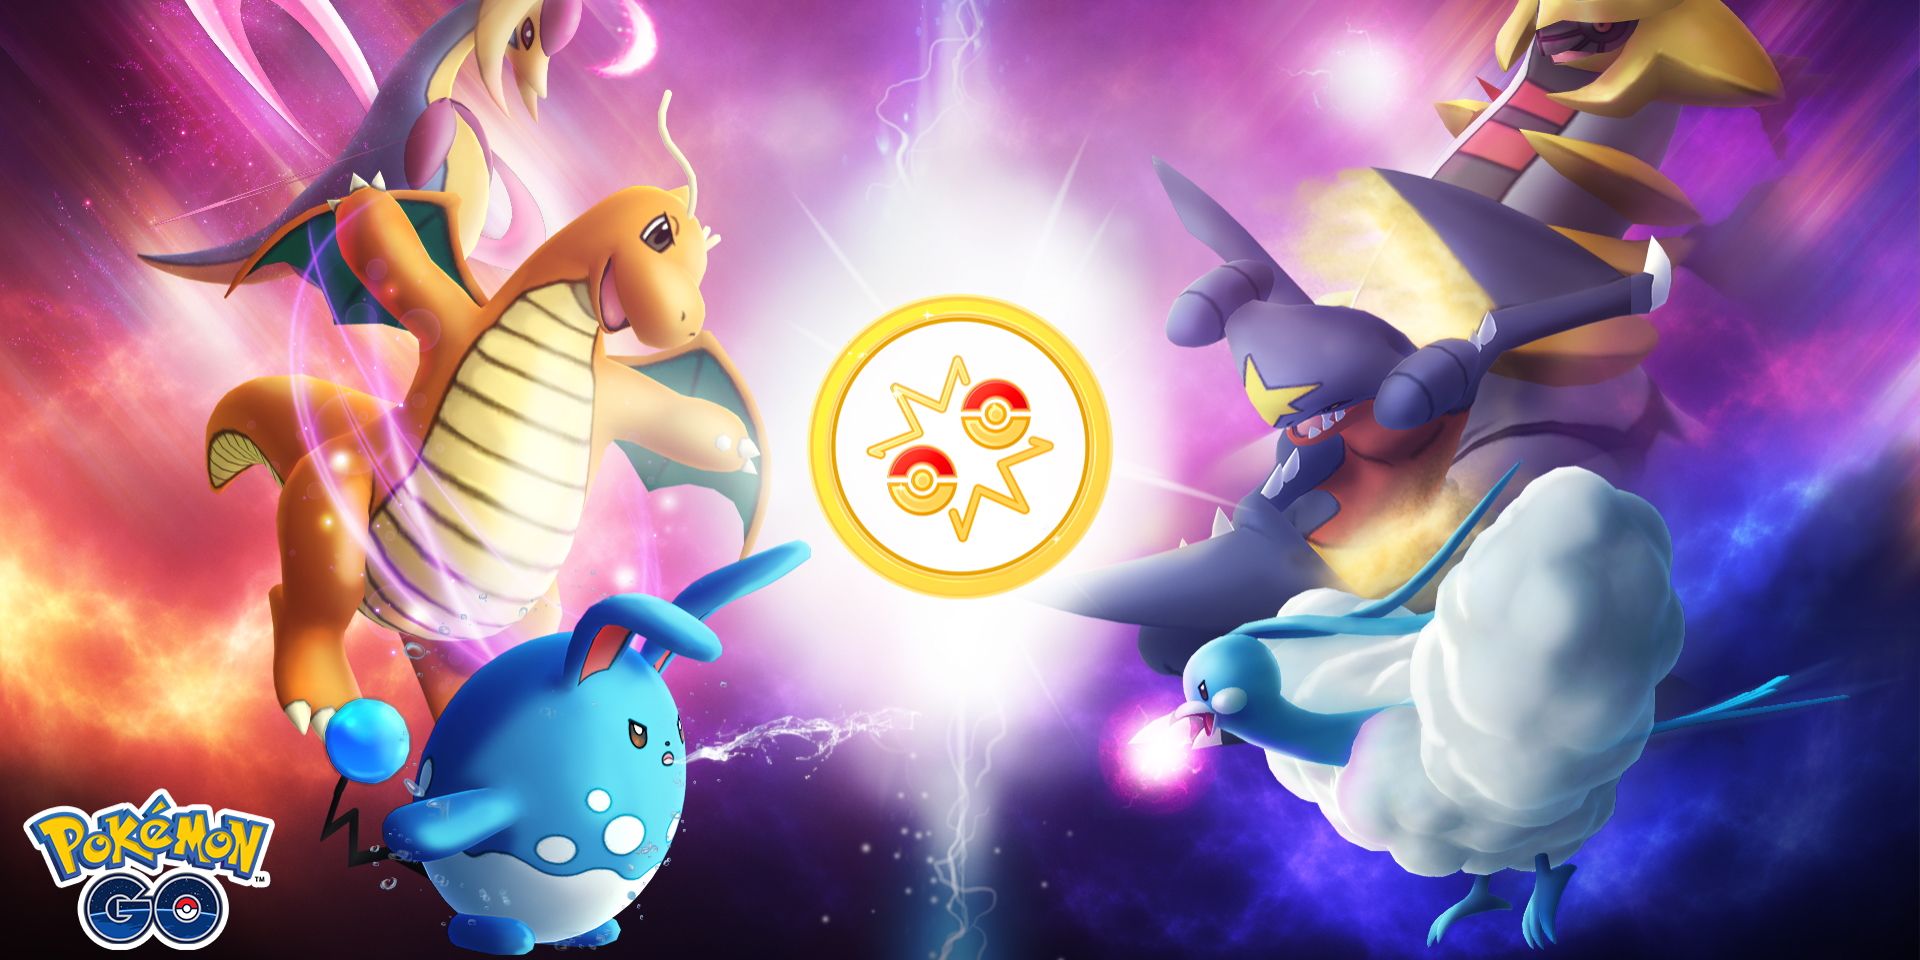 Six different Pokemon facing eachother to battle, with the Go Battle League symbol in the middle